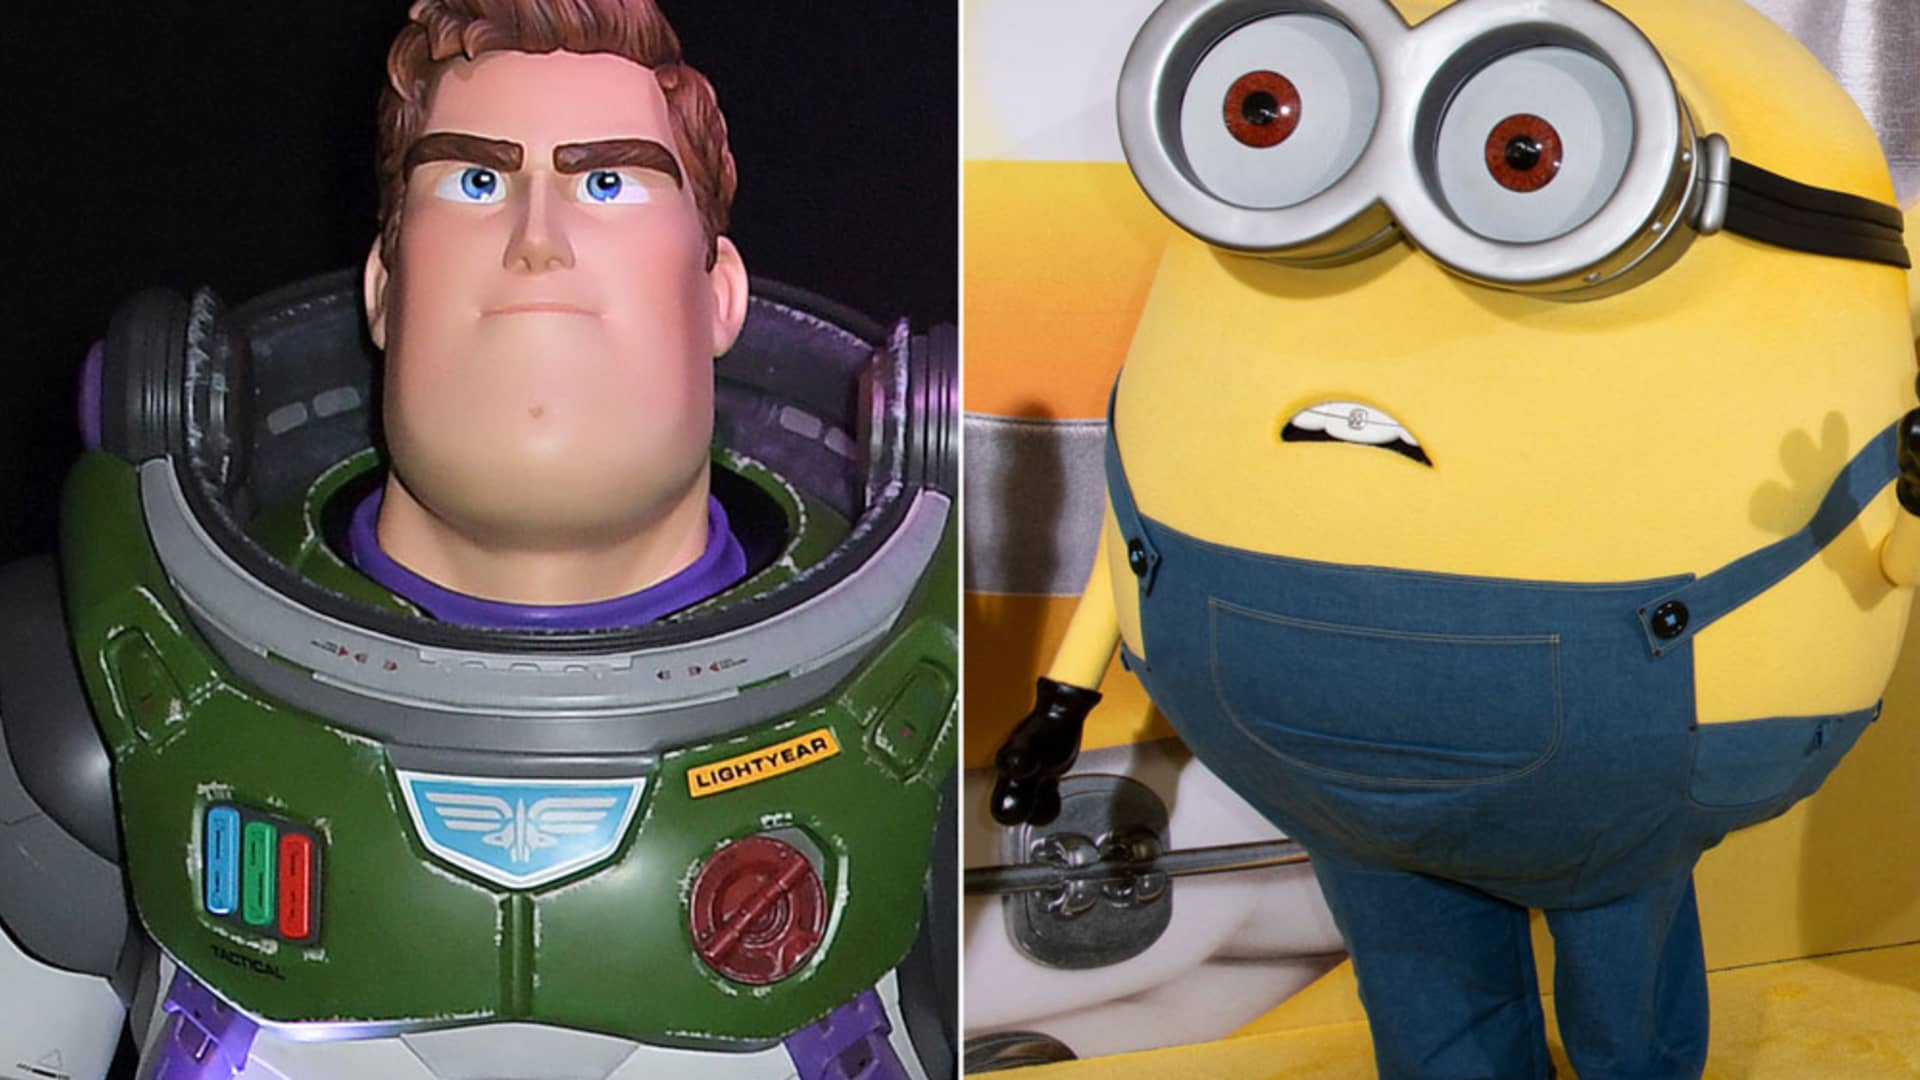 Why ‘Minions’ beat ‘Lightyear’ at the box office